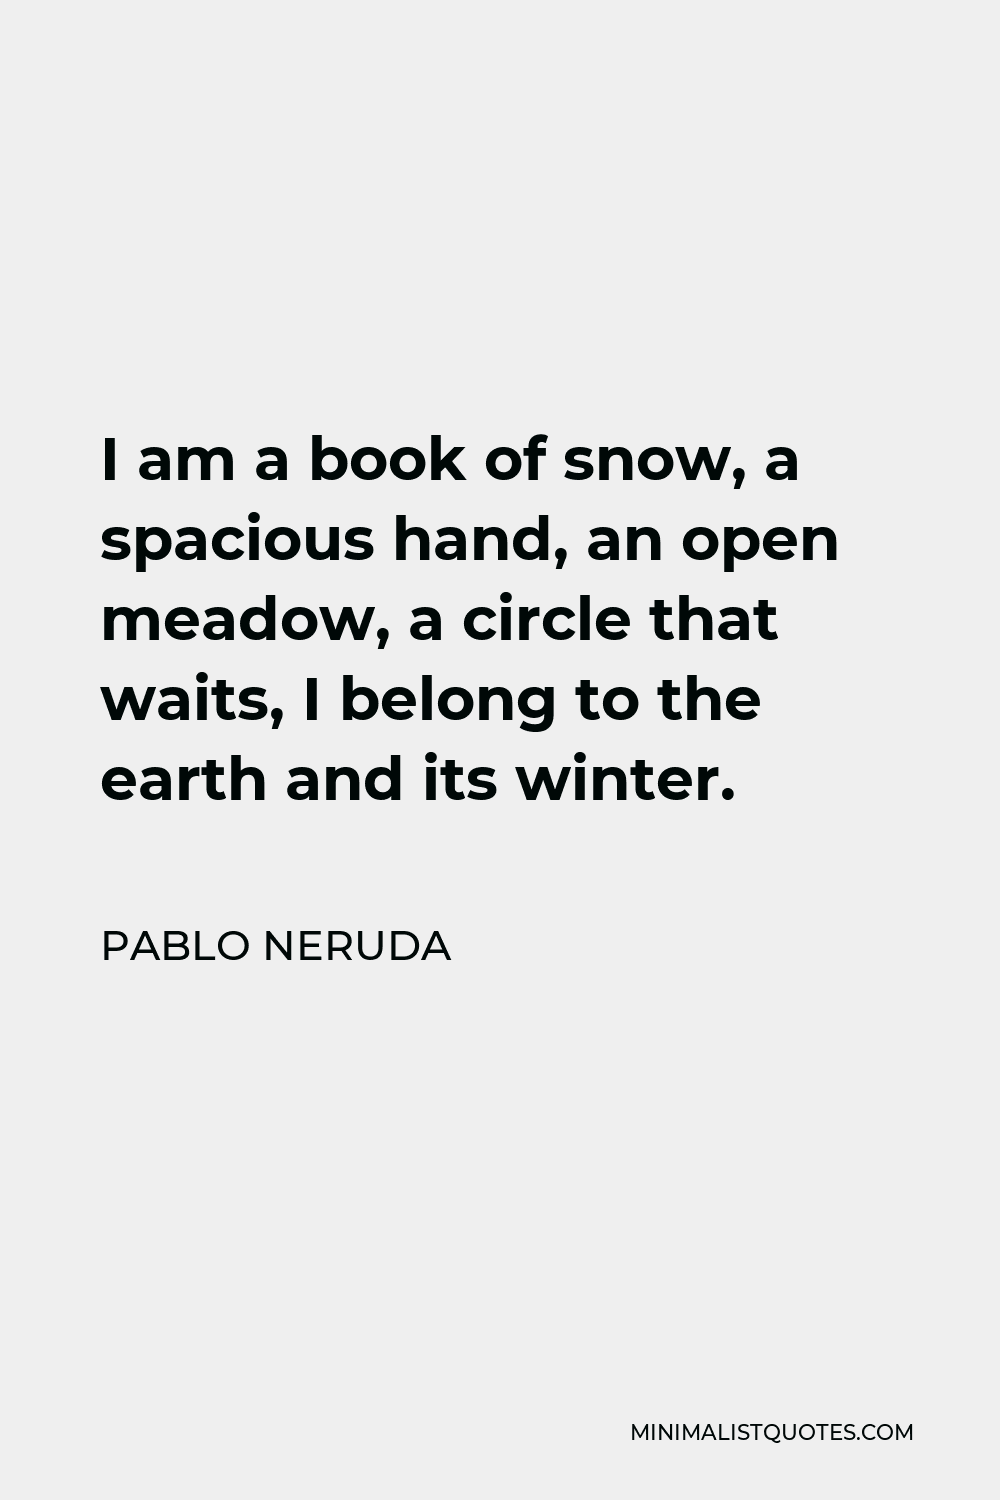 Pablo Neruda Quote - I am a book of snow, a spacious hand, an open meadow, a circle that waits, I belong to the earth and its winter.